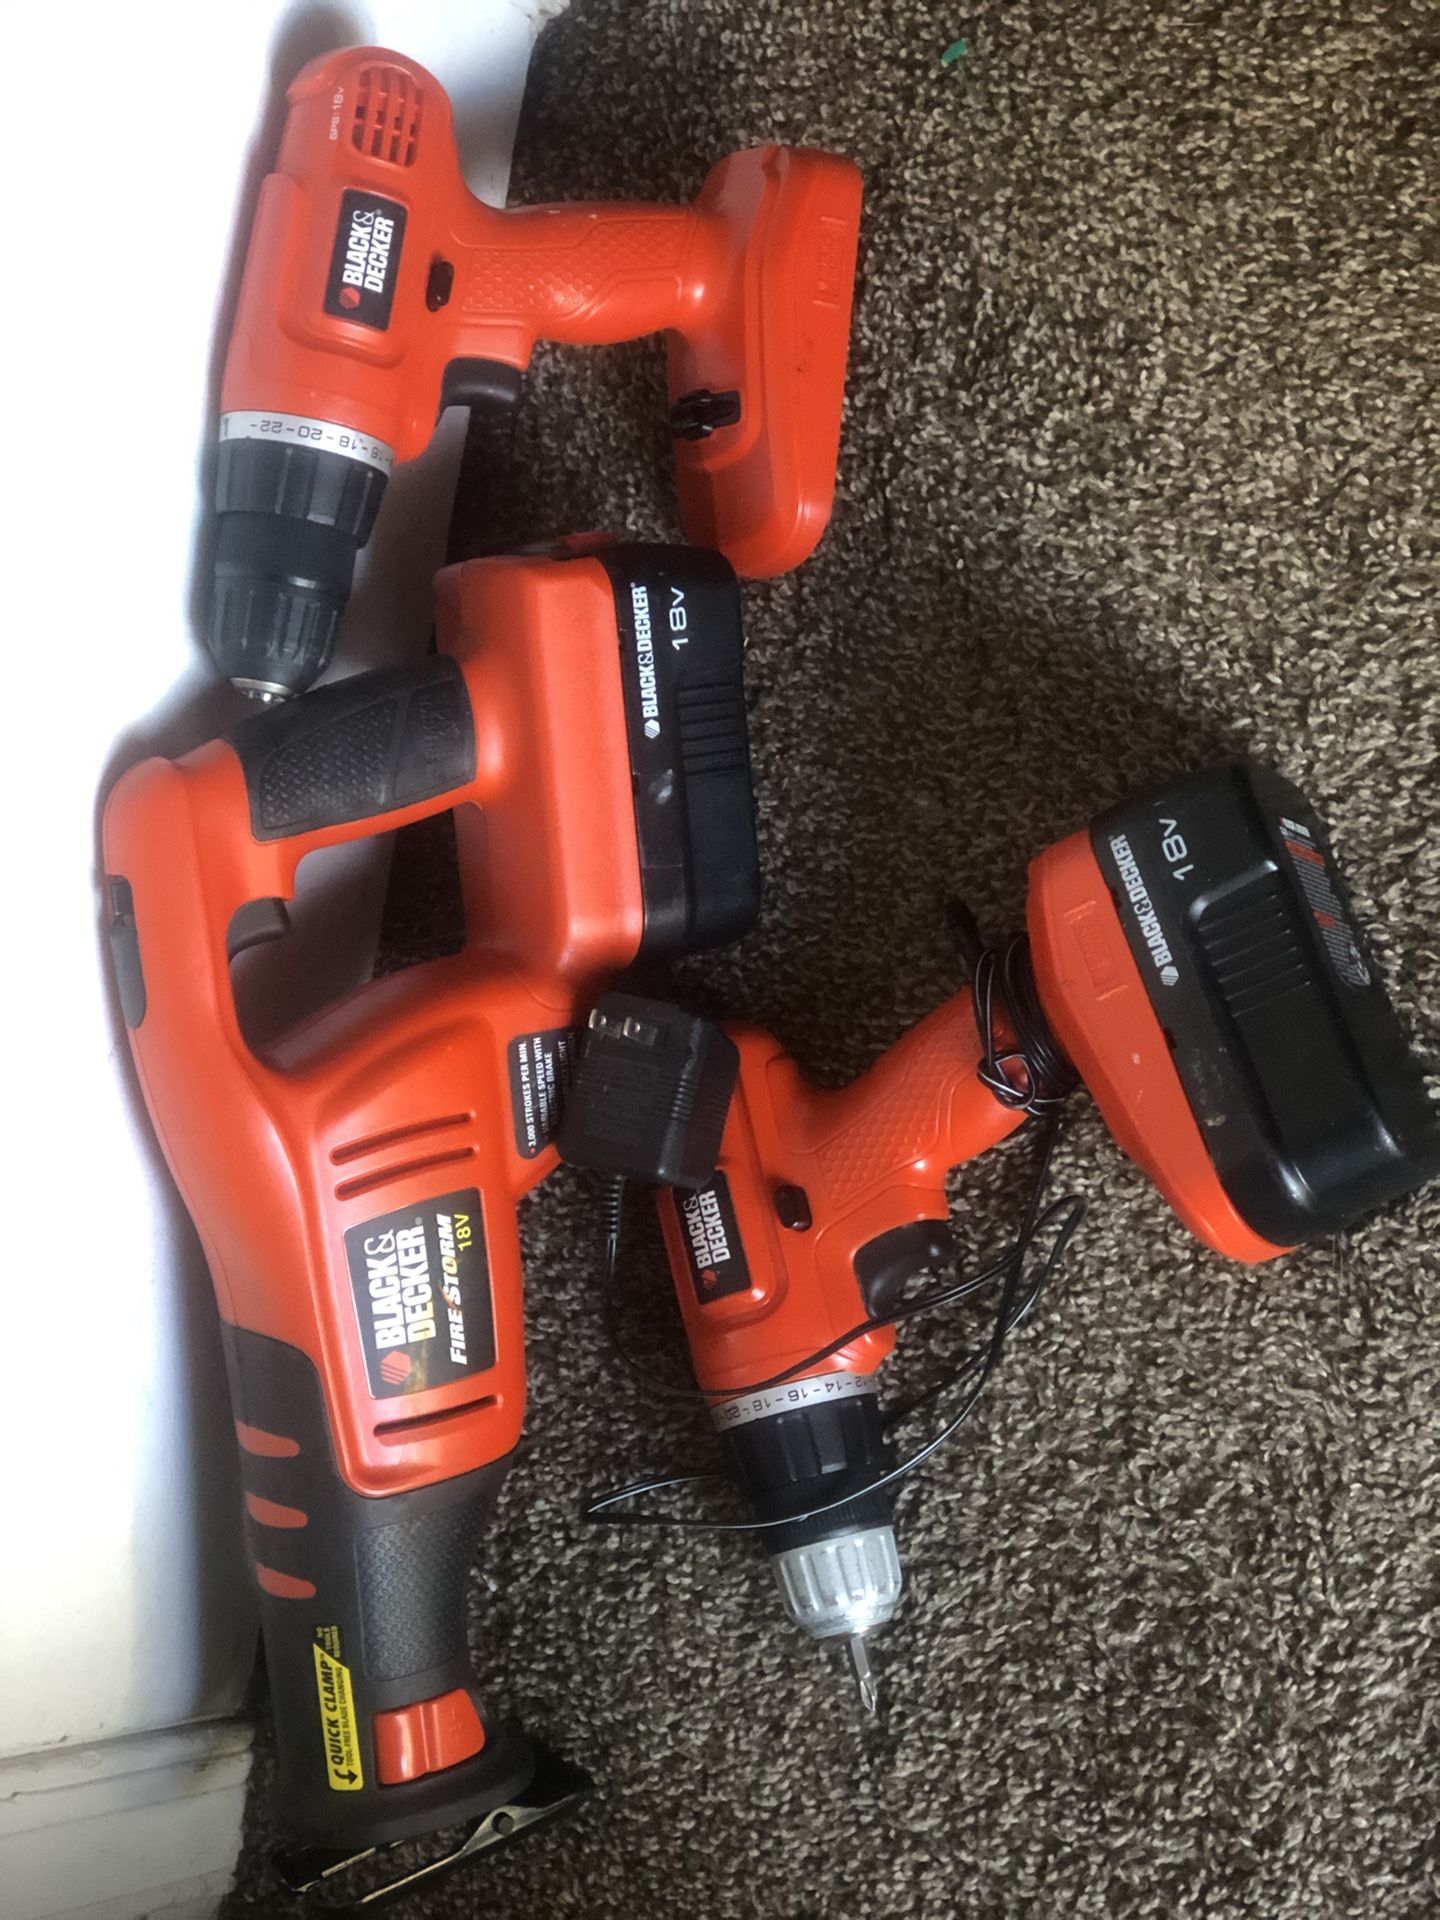 Black and decker 18 v reciprocating saw and 2 drills with charger